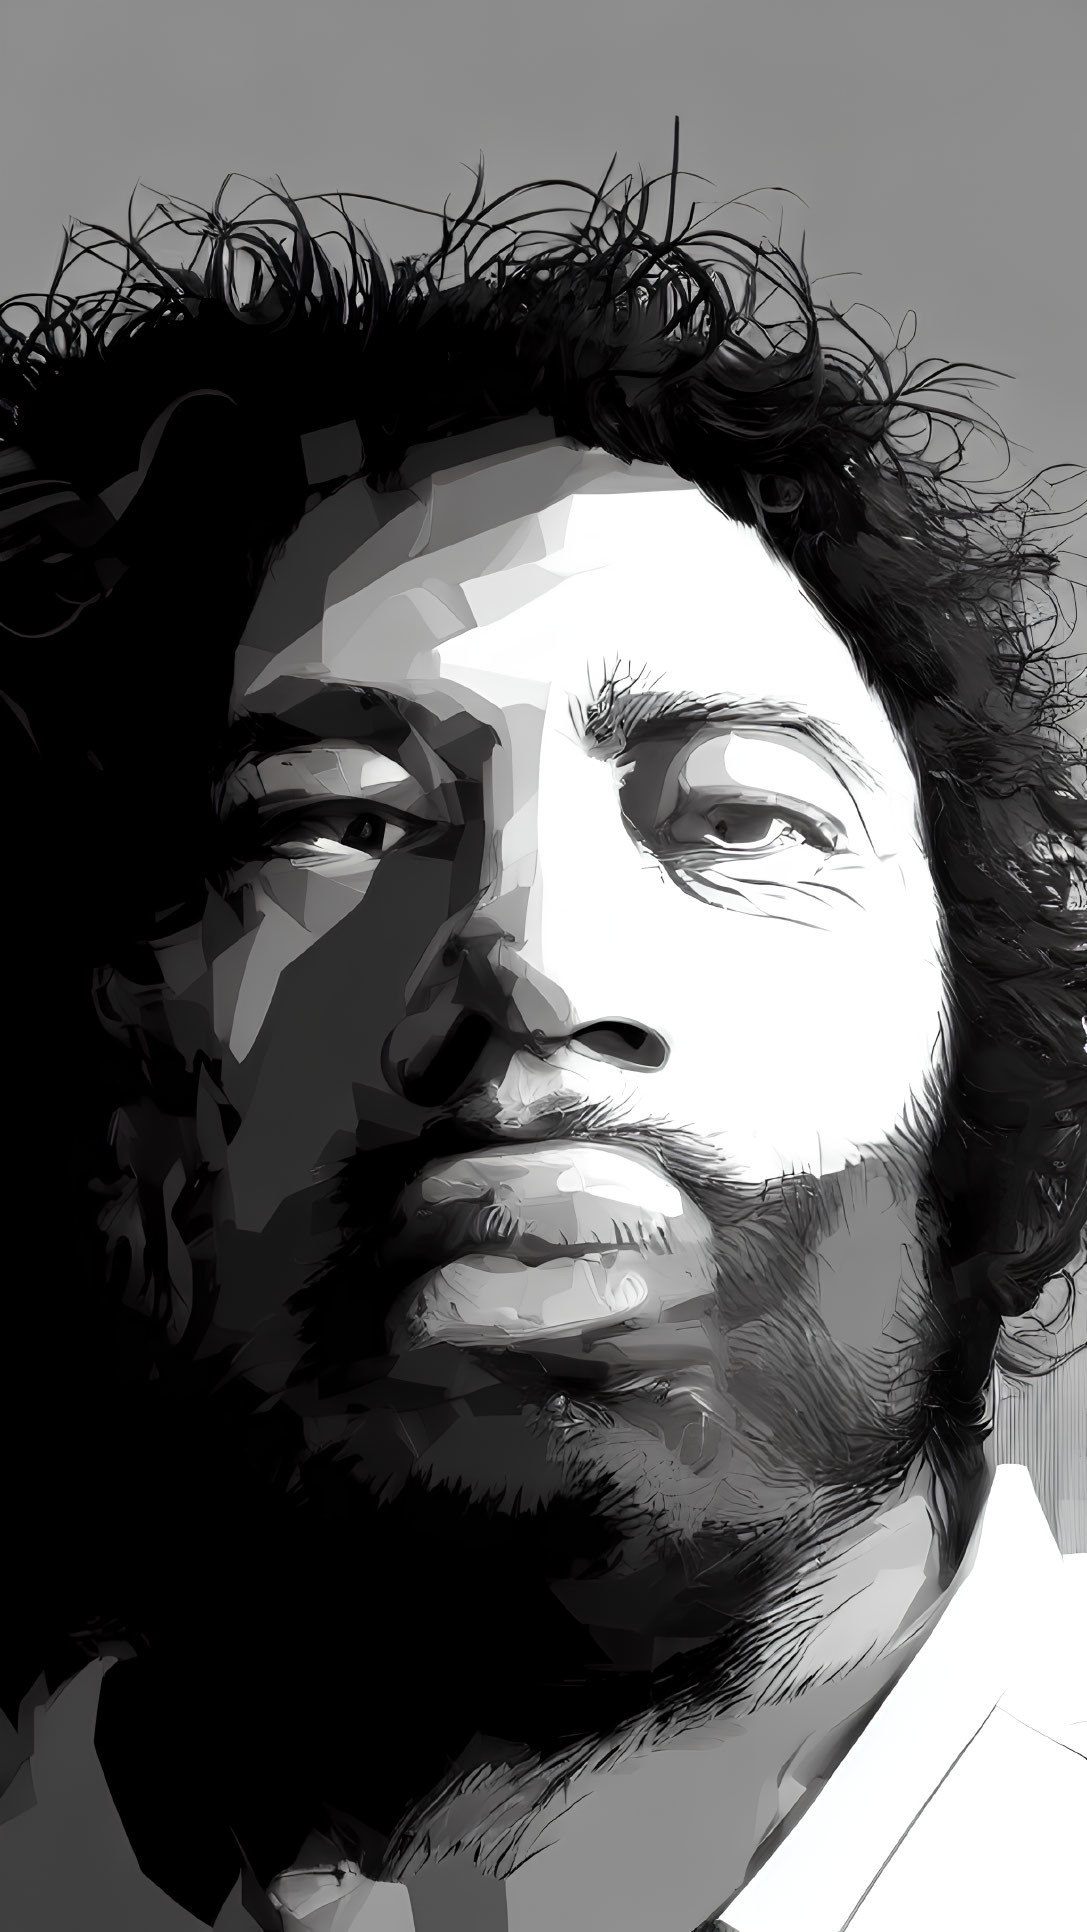 Monochromatic digital portrait of a man with curly hair and beard in high-contrast style